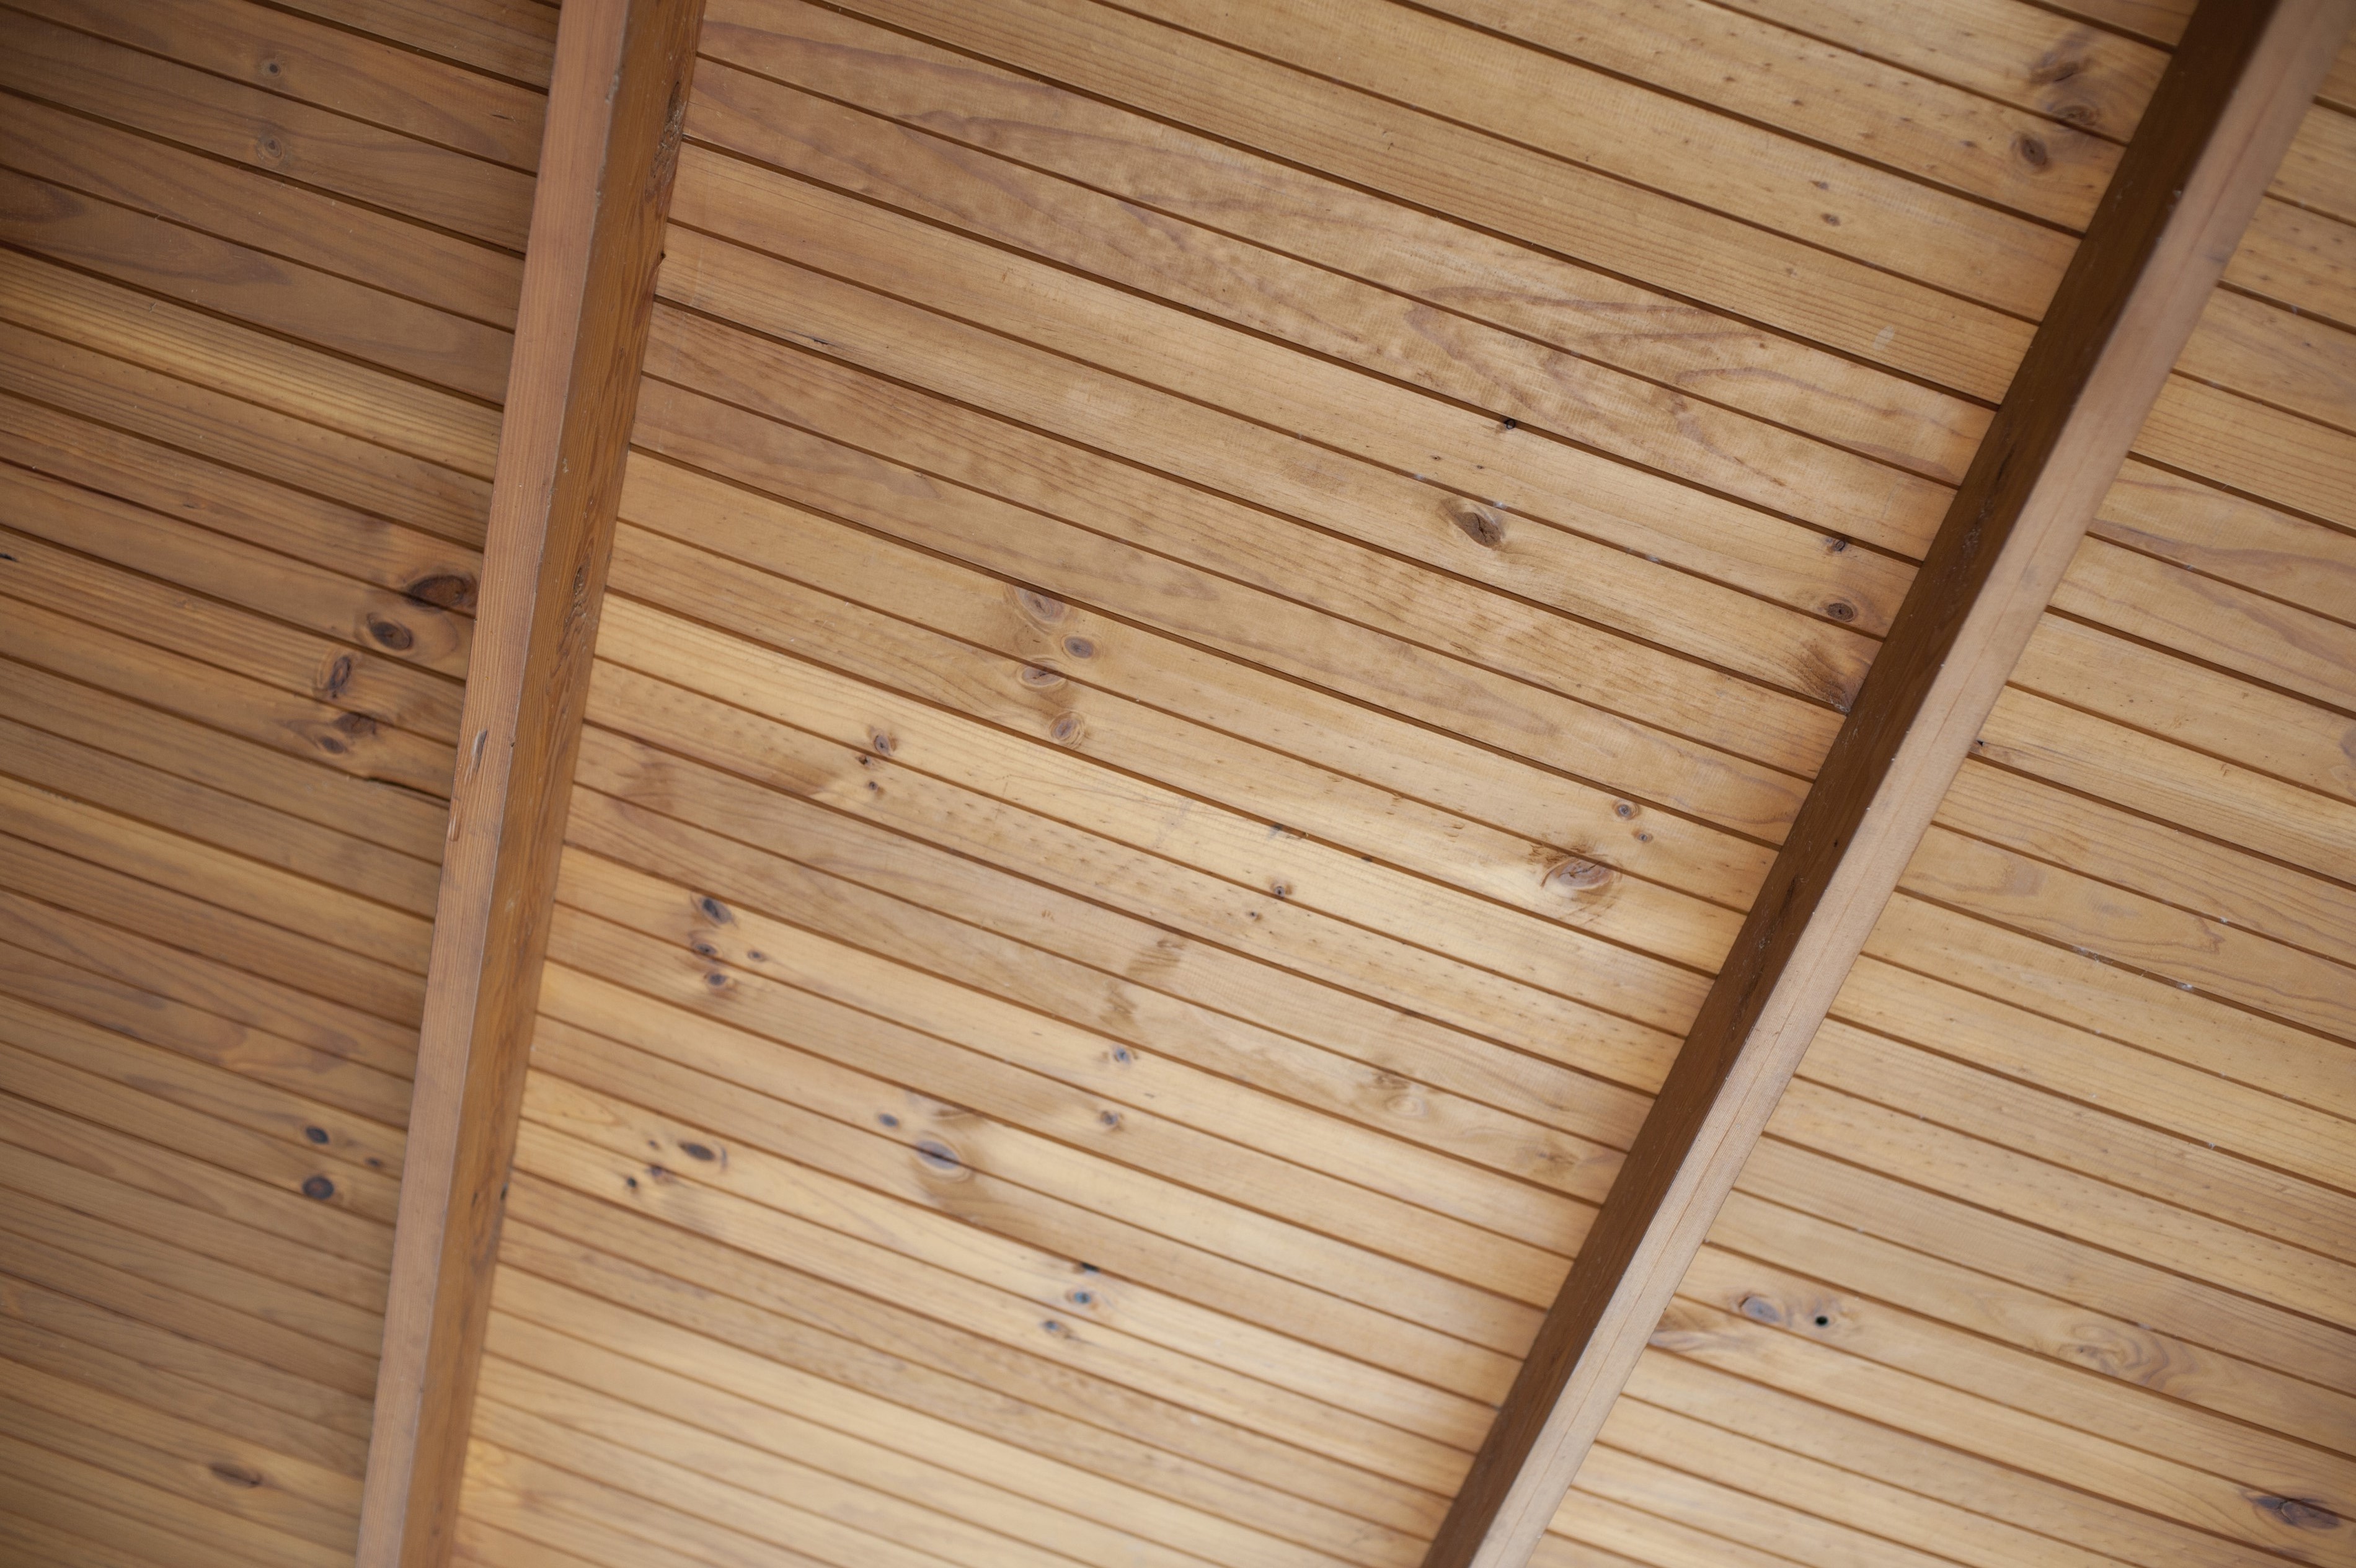 Wooden ceiling | Free backgrounds and textures | Cr103.com